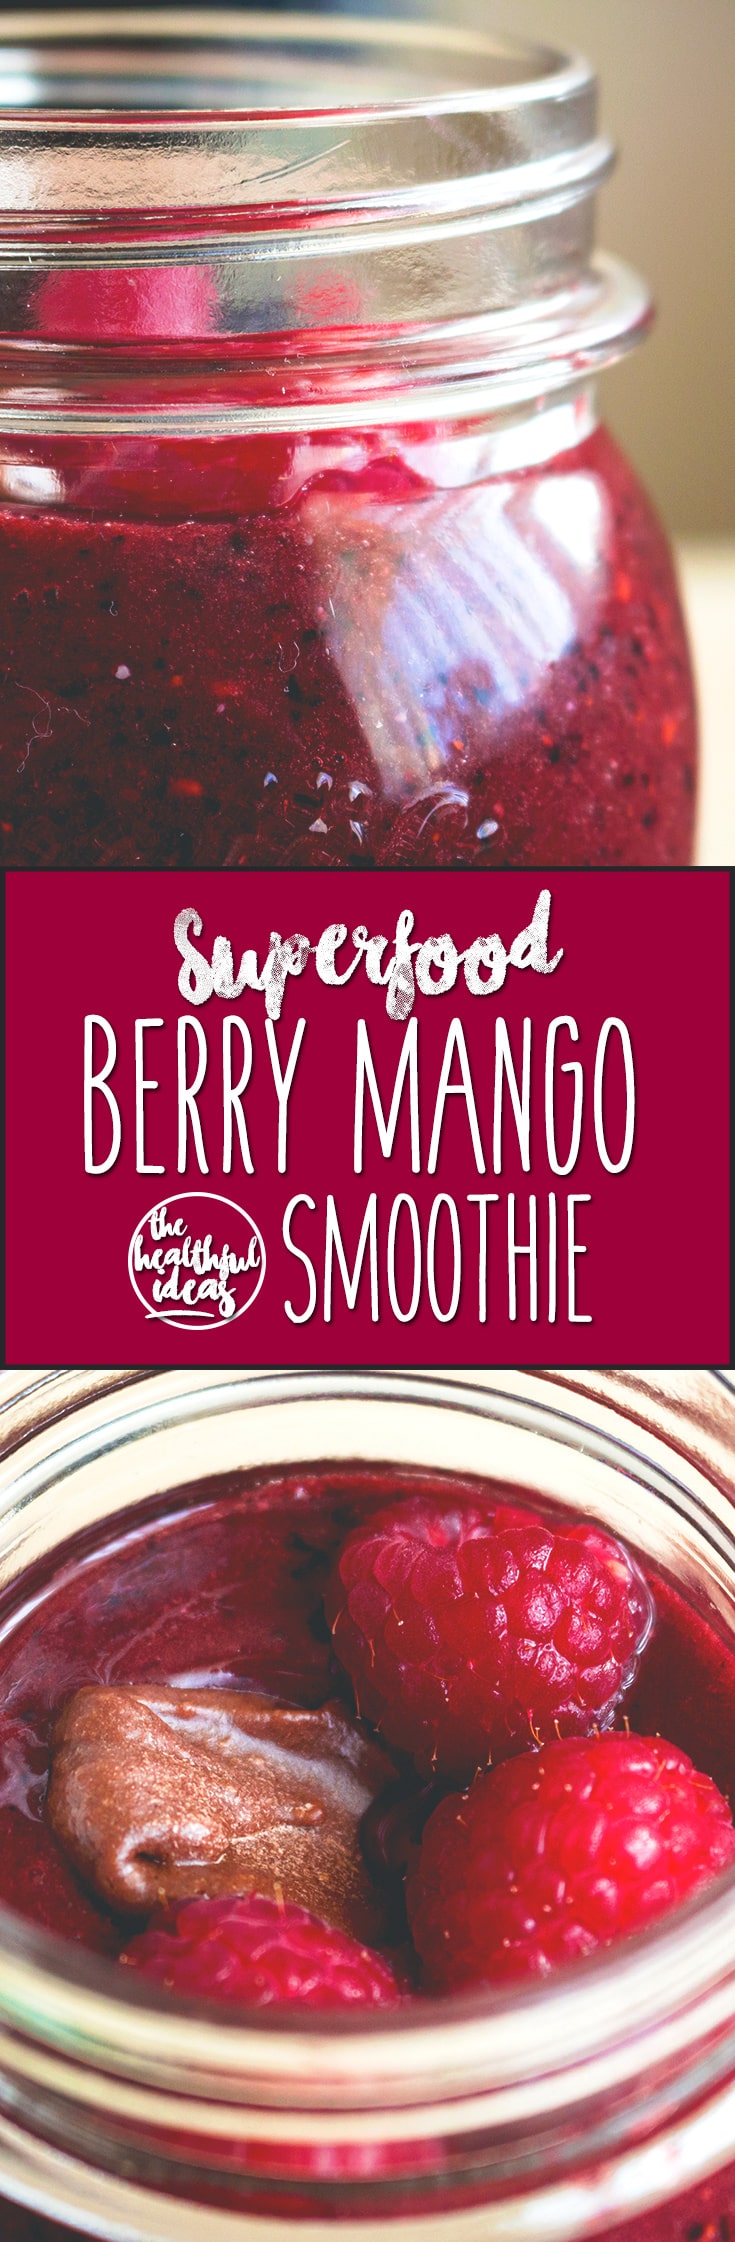 Superfood Berry Mango Smoothie - vegan, healthy, and delicious, this smoothie is the perfect breakfast to start your day with! I love this recipe! Smoothies are great for busy mornings - you can eat them on the go! | thehealthfulideas.com